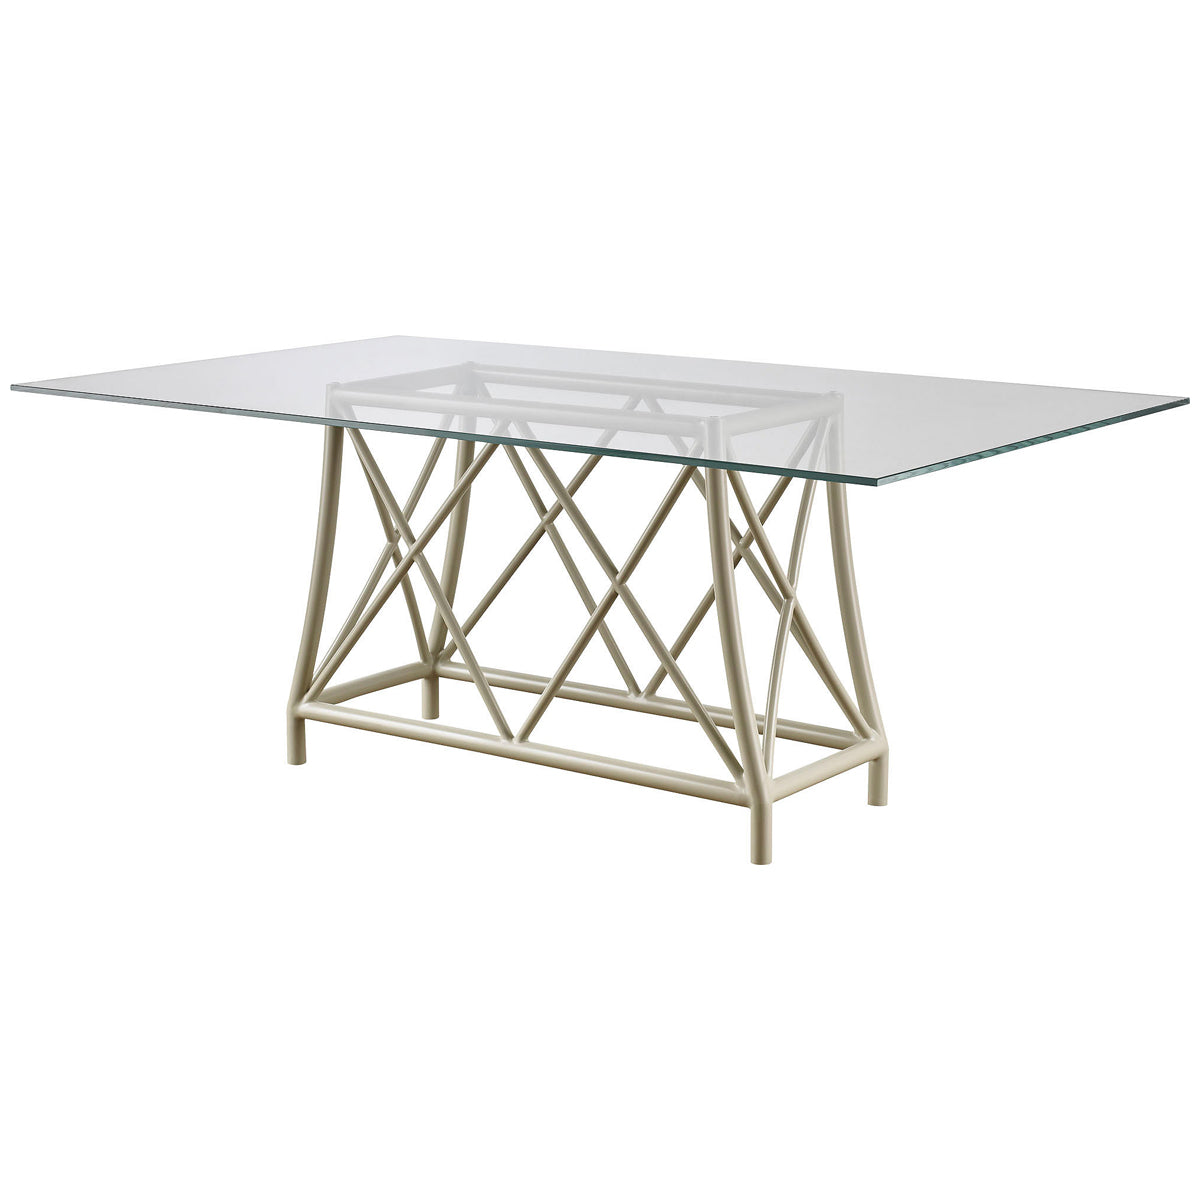 Baker Furniture Gondola Outdoor Rectangle Dining Table MCO3035